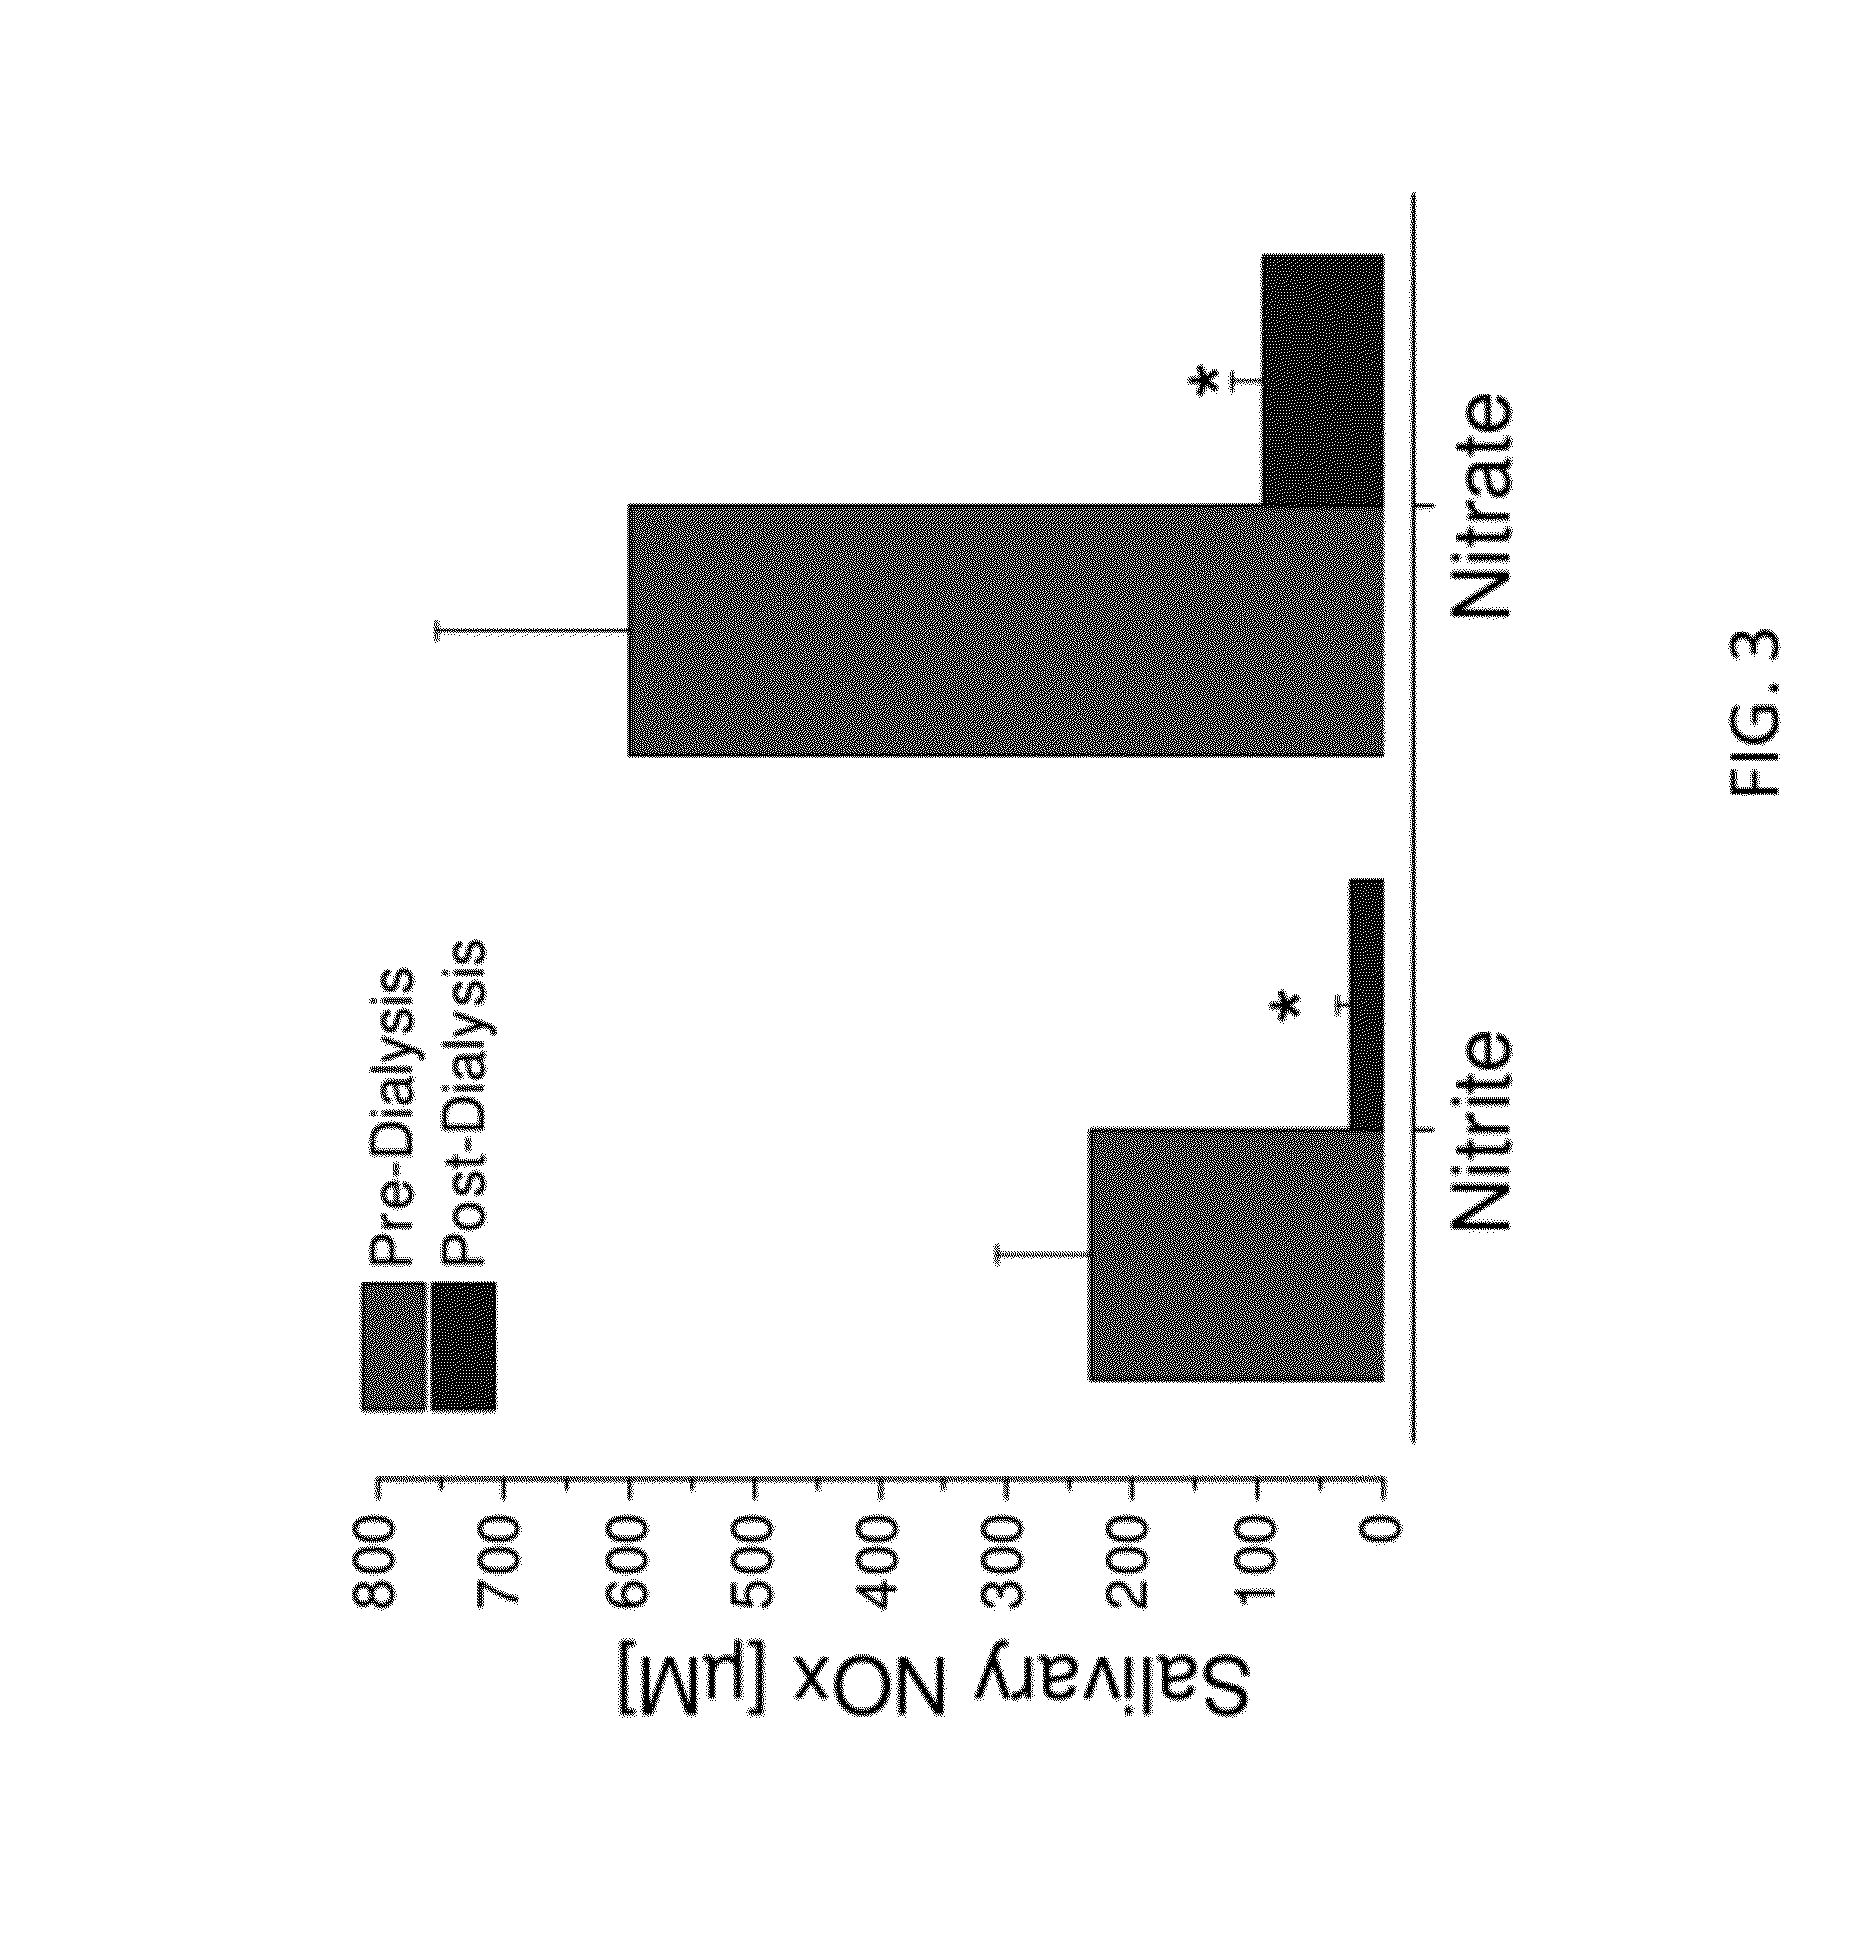 Method of Measuring and Monitoring In Vivo Nitrite Levels